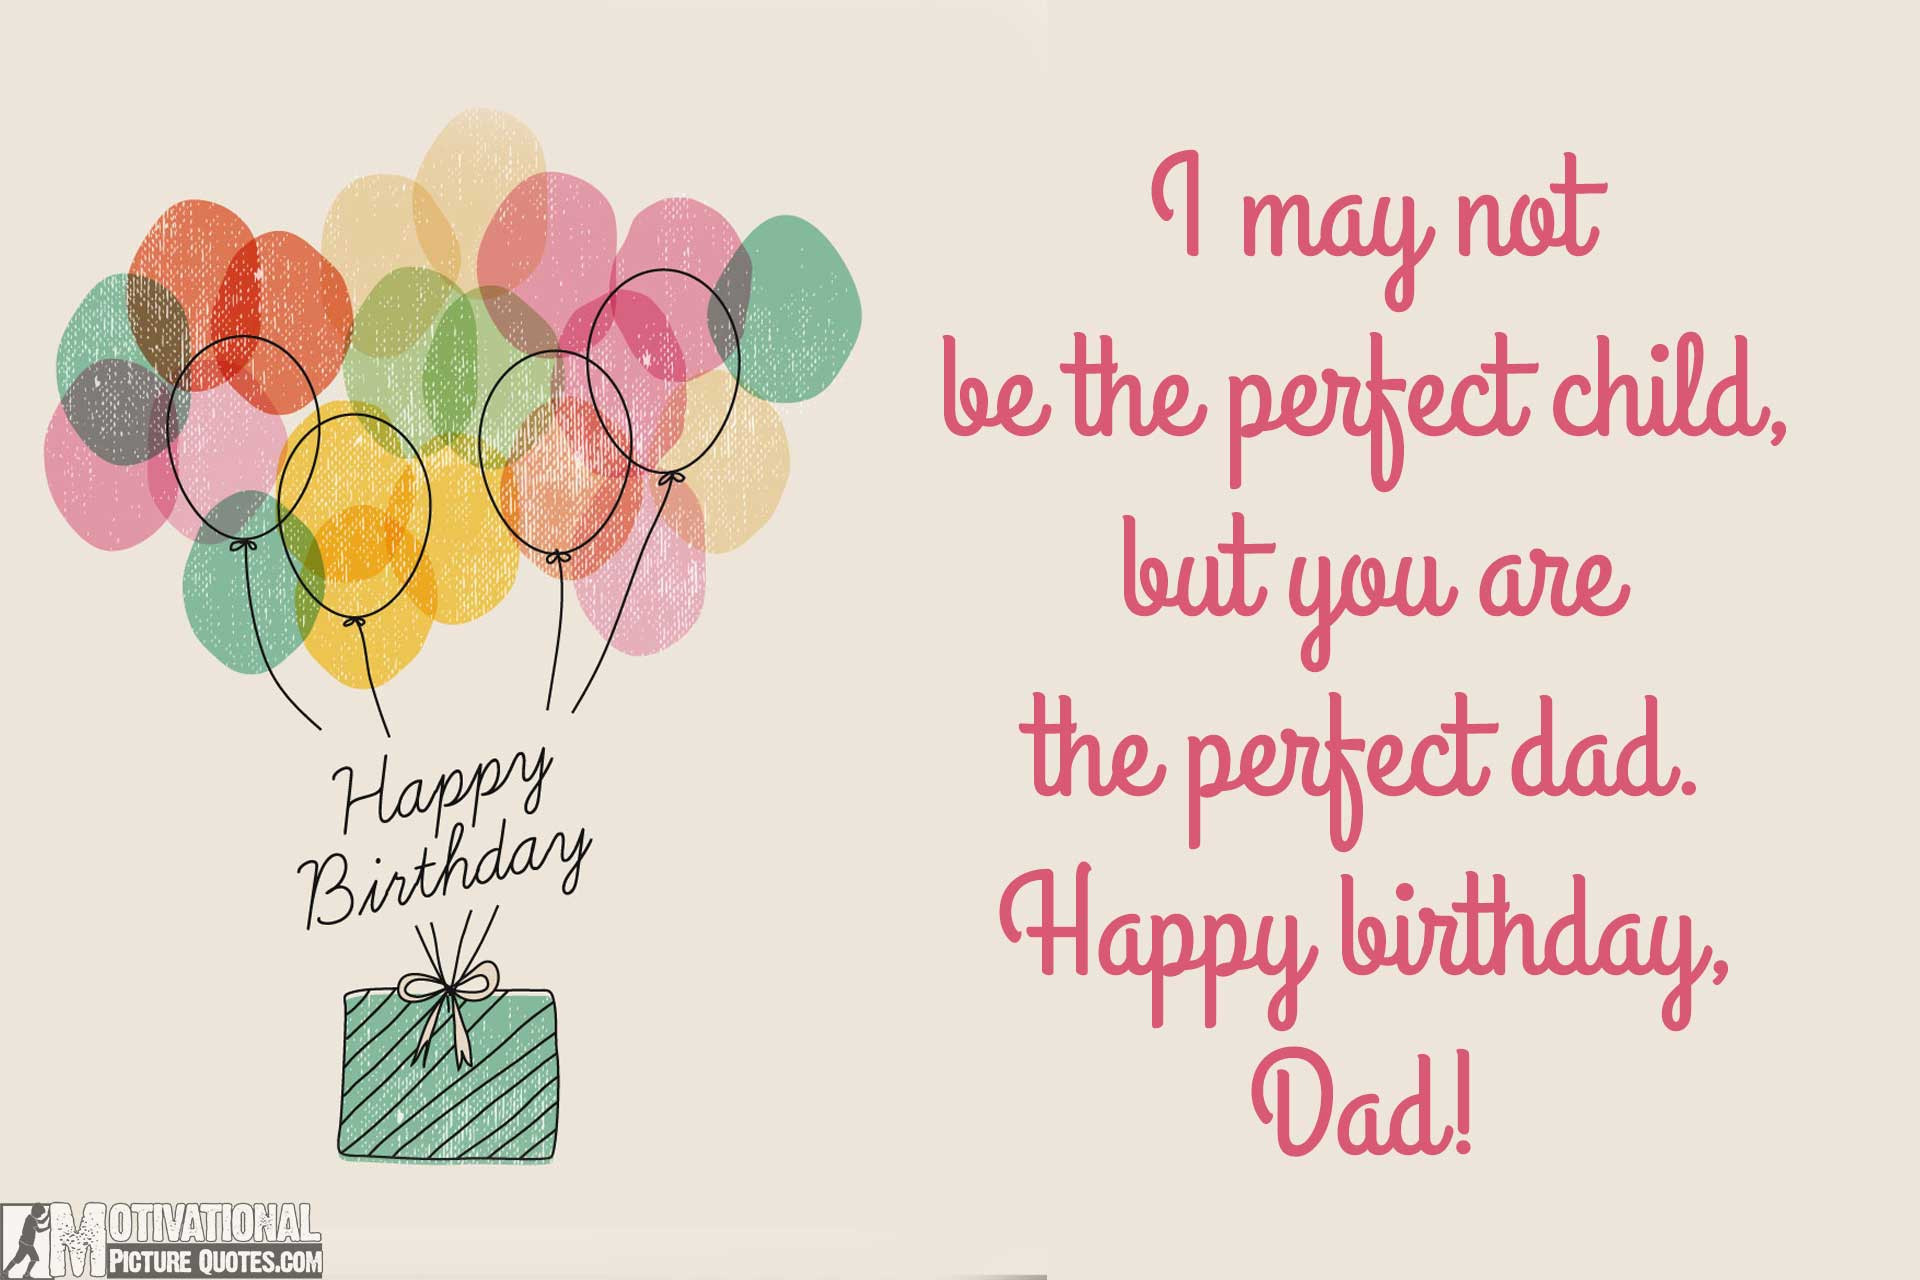 Quote For Dads Birthday
 35 Inspirational Birthday Quotes